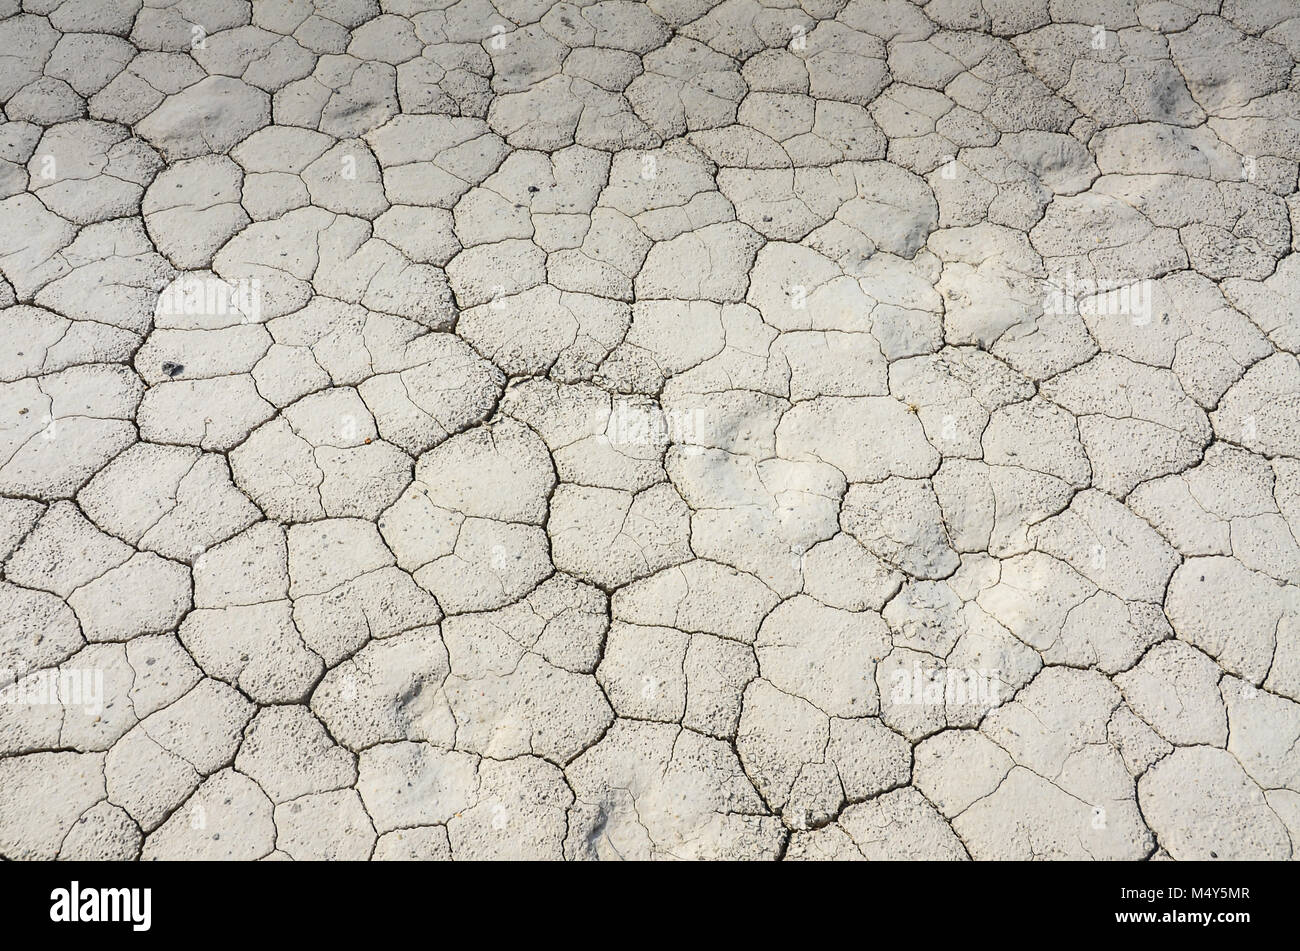 Background of cracked earth in salt flats of Nevada. Stock Photo